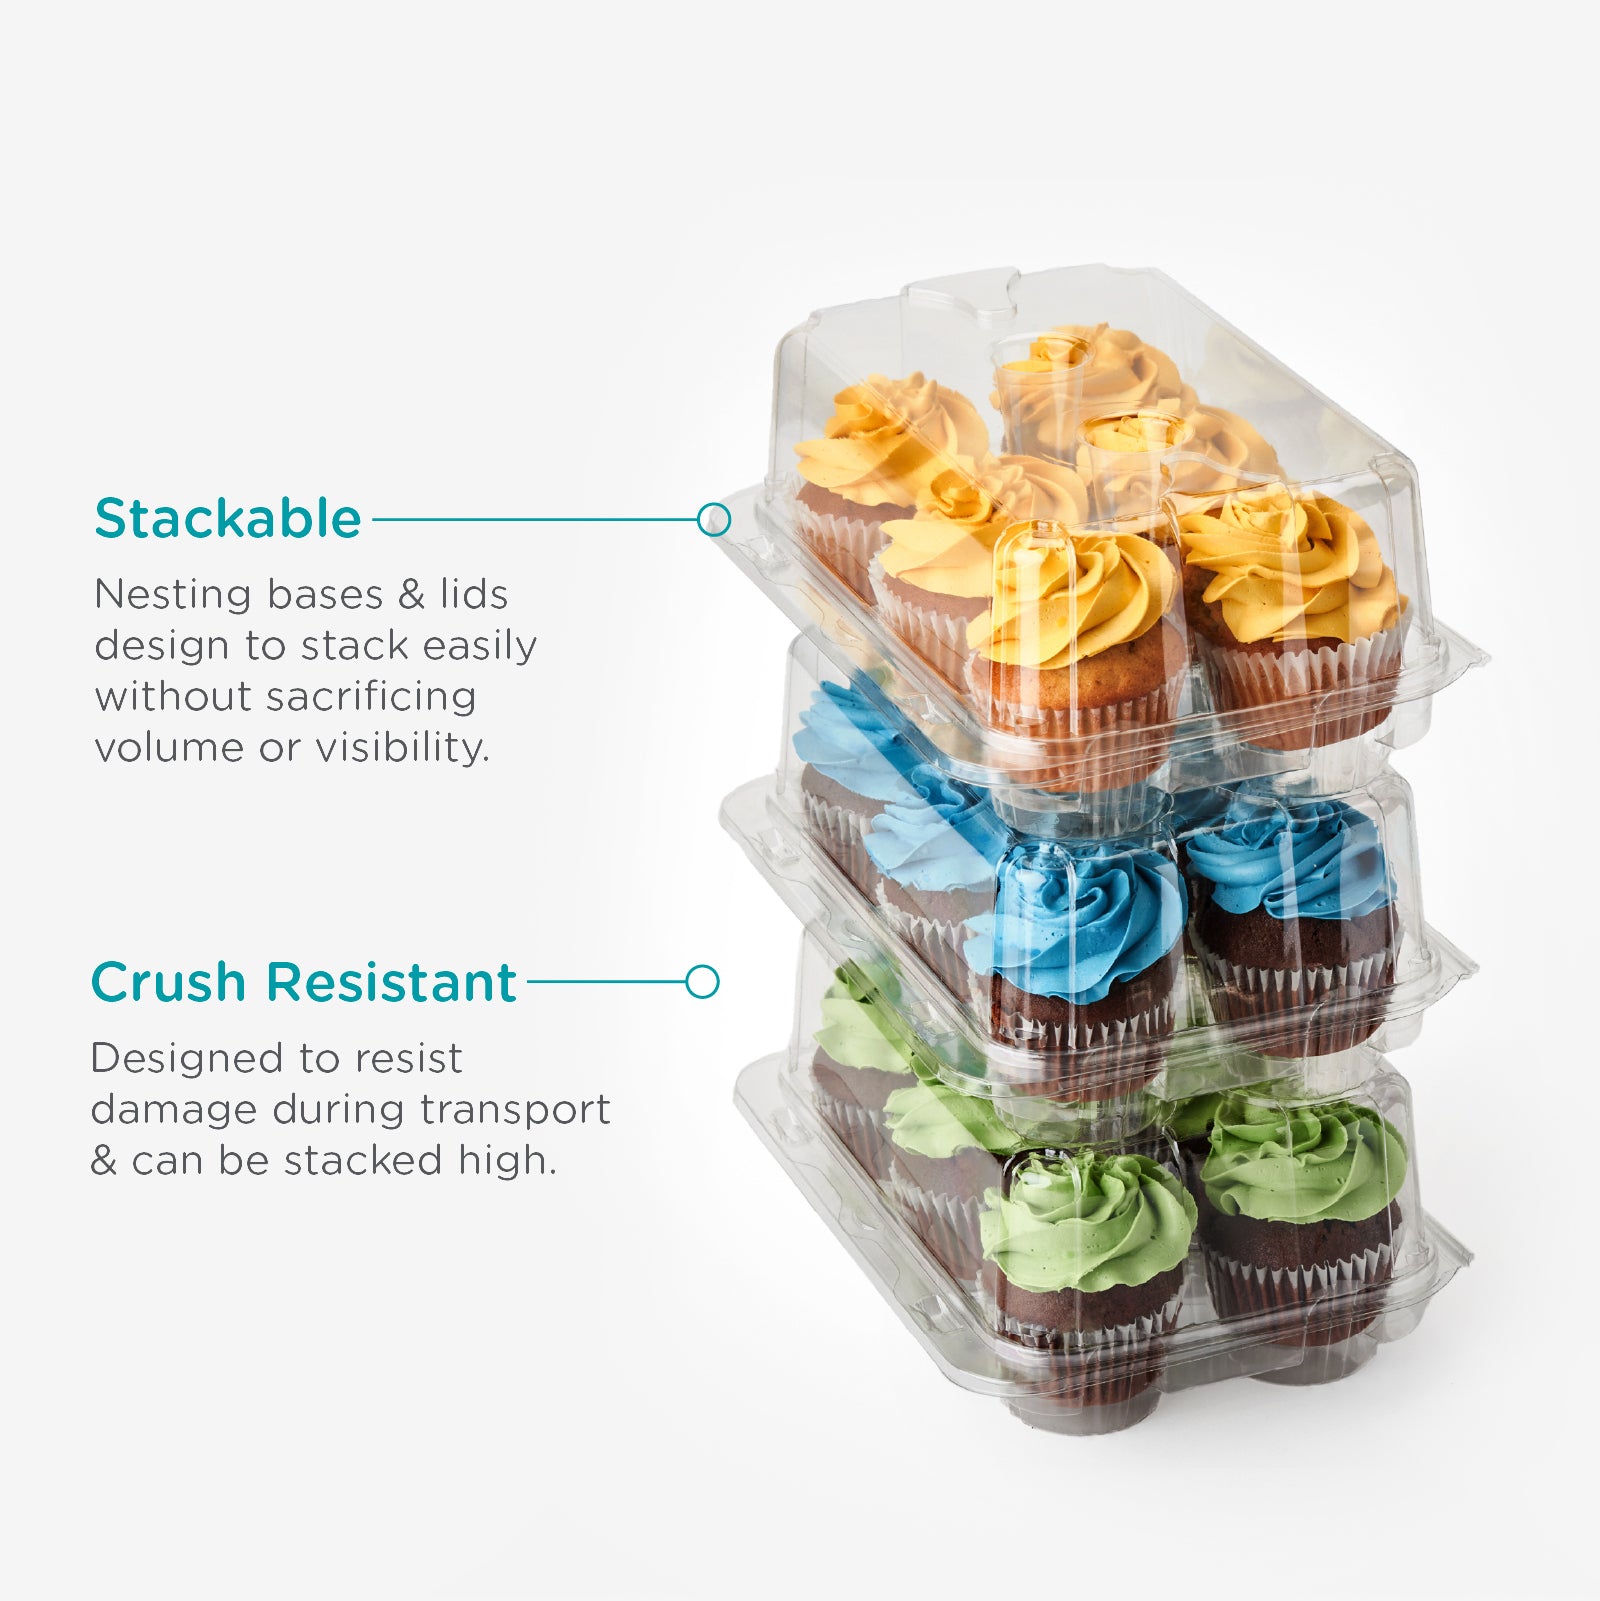 6 Cupcake & Muffin Container | Bioplastic Box for 6 Count 2.75 Cupcakes Items / Case: 300 / Crystal Clear Made by Good Natured Products Inc.